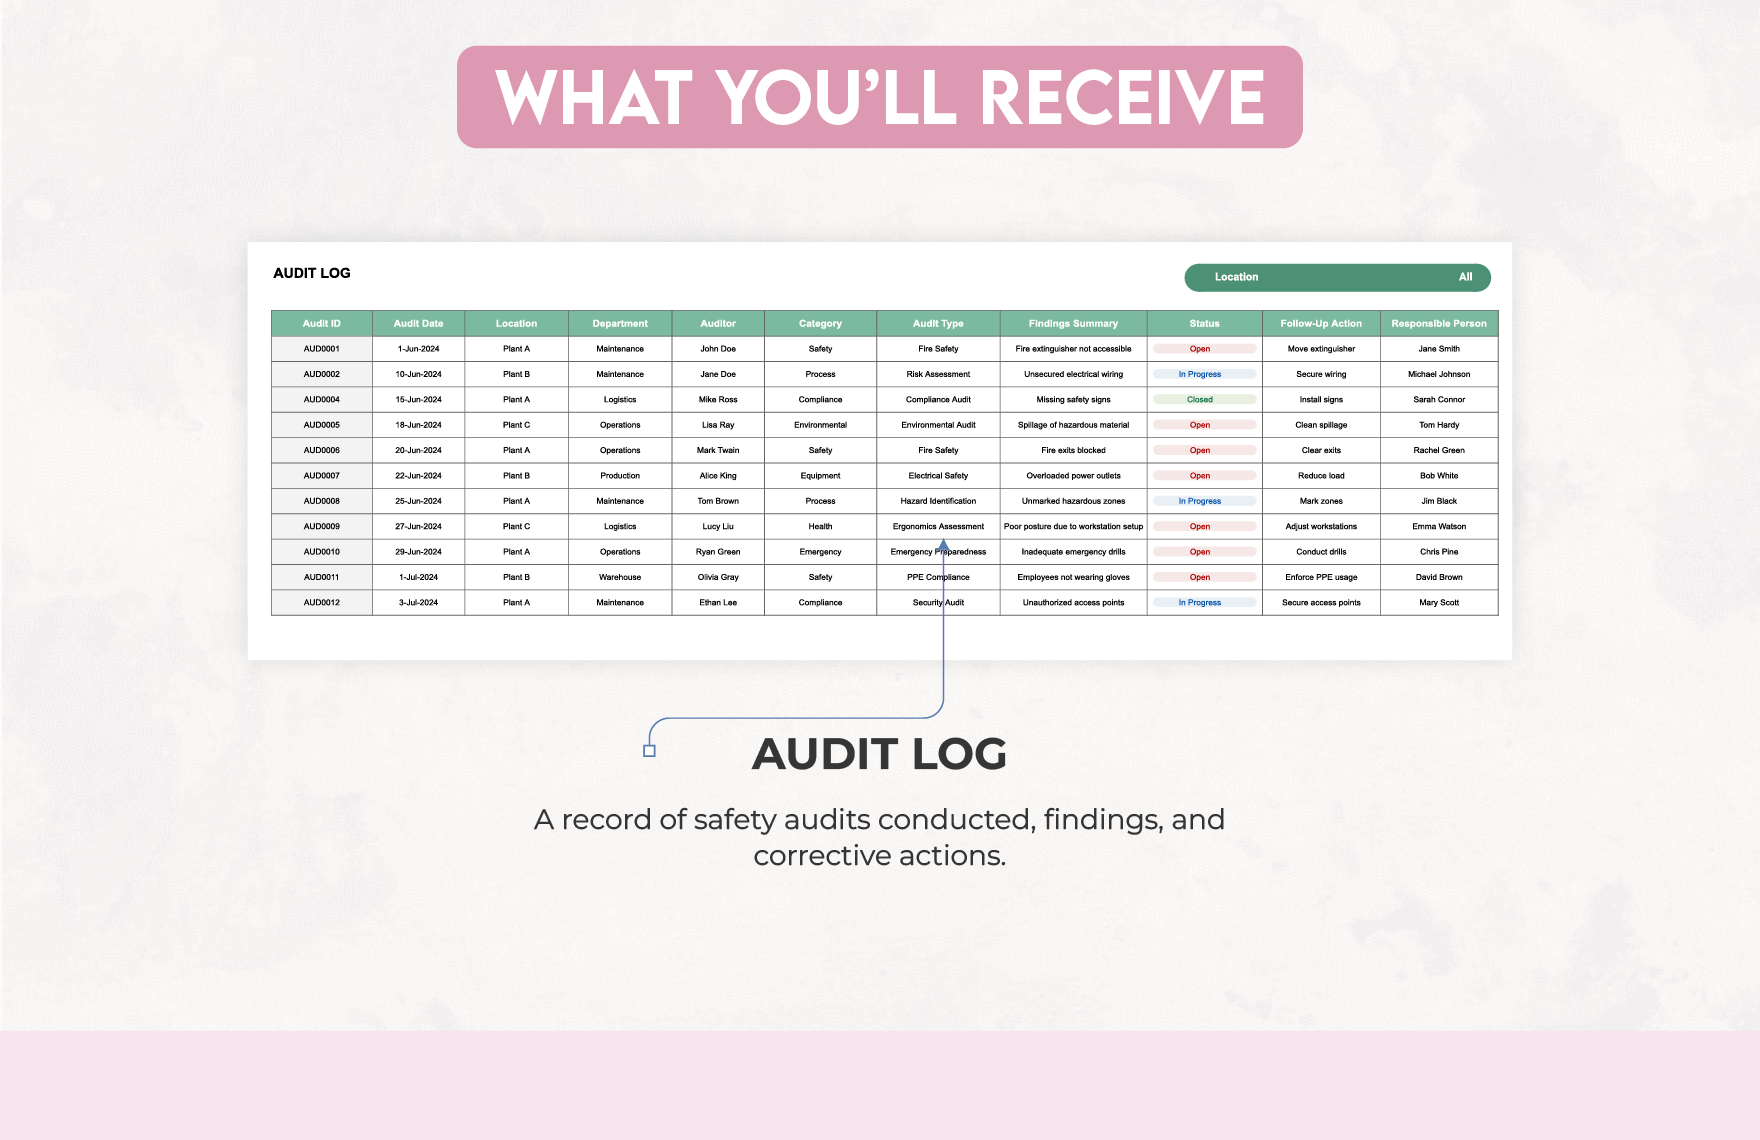 Safety Audit Tracking Dashboard Template